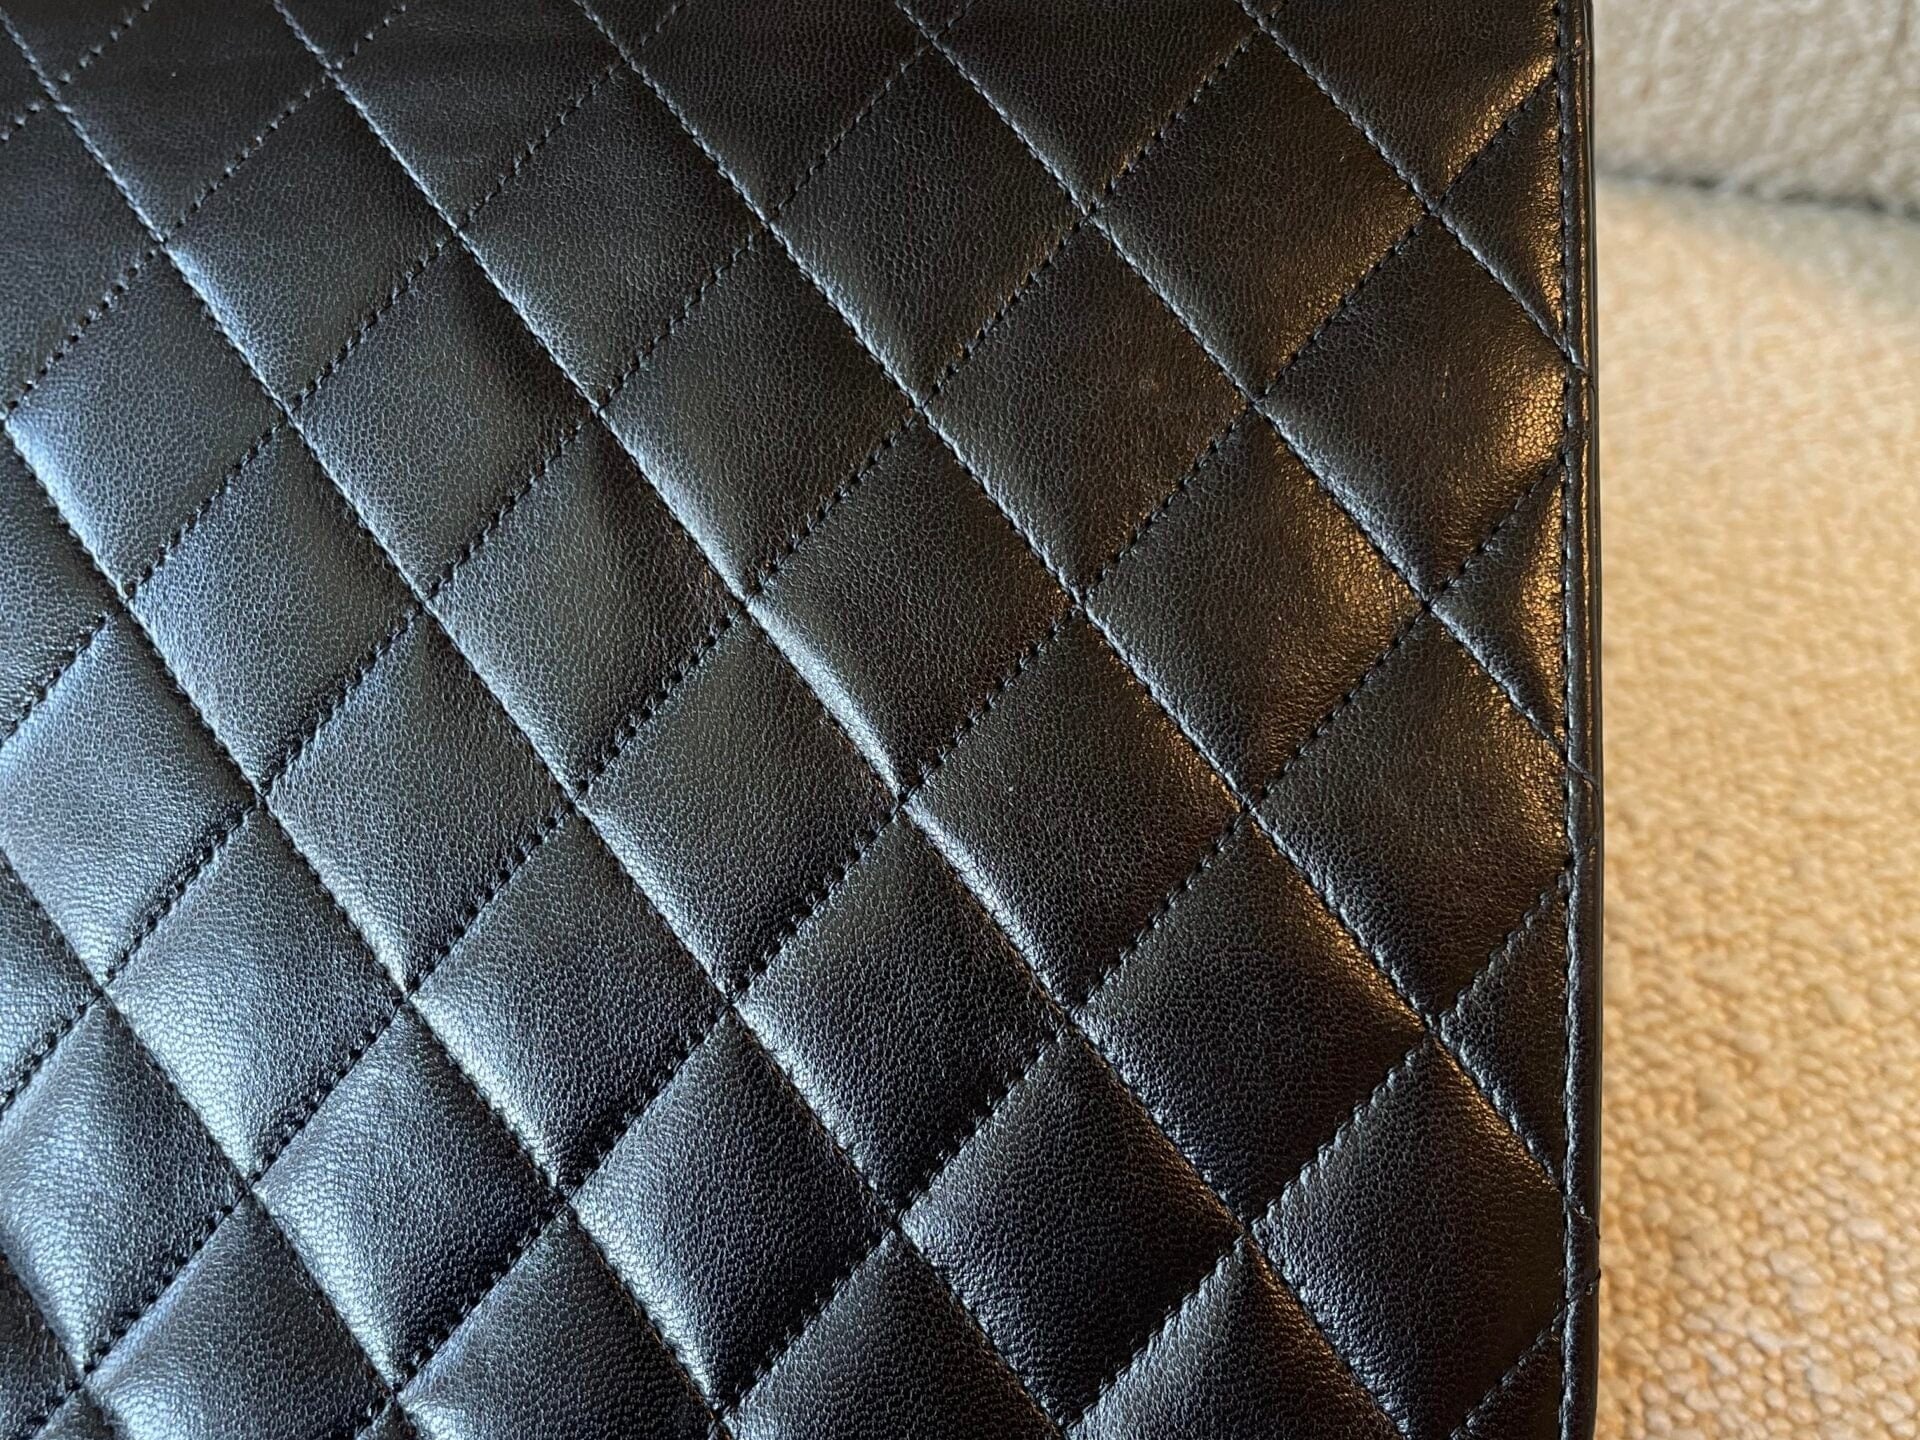 CHANEL Handbag Chanel Black Vintage Lambskin Quilted Single Flap GHW - Redeluxe